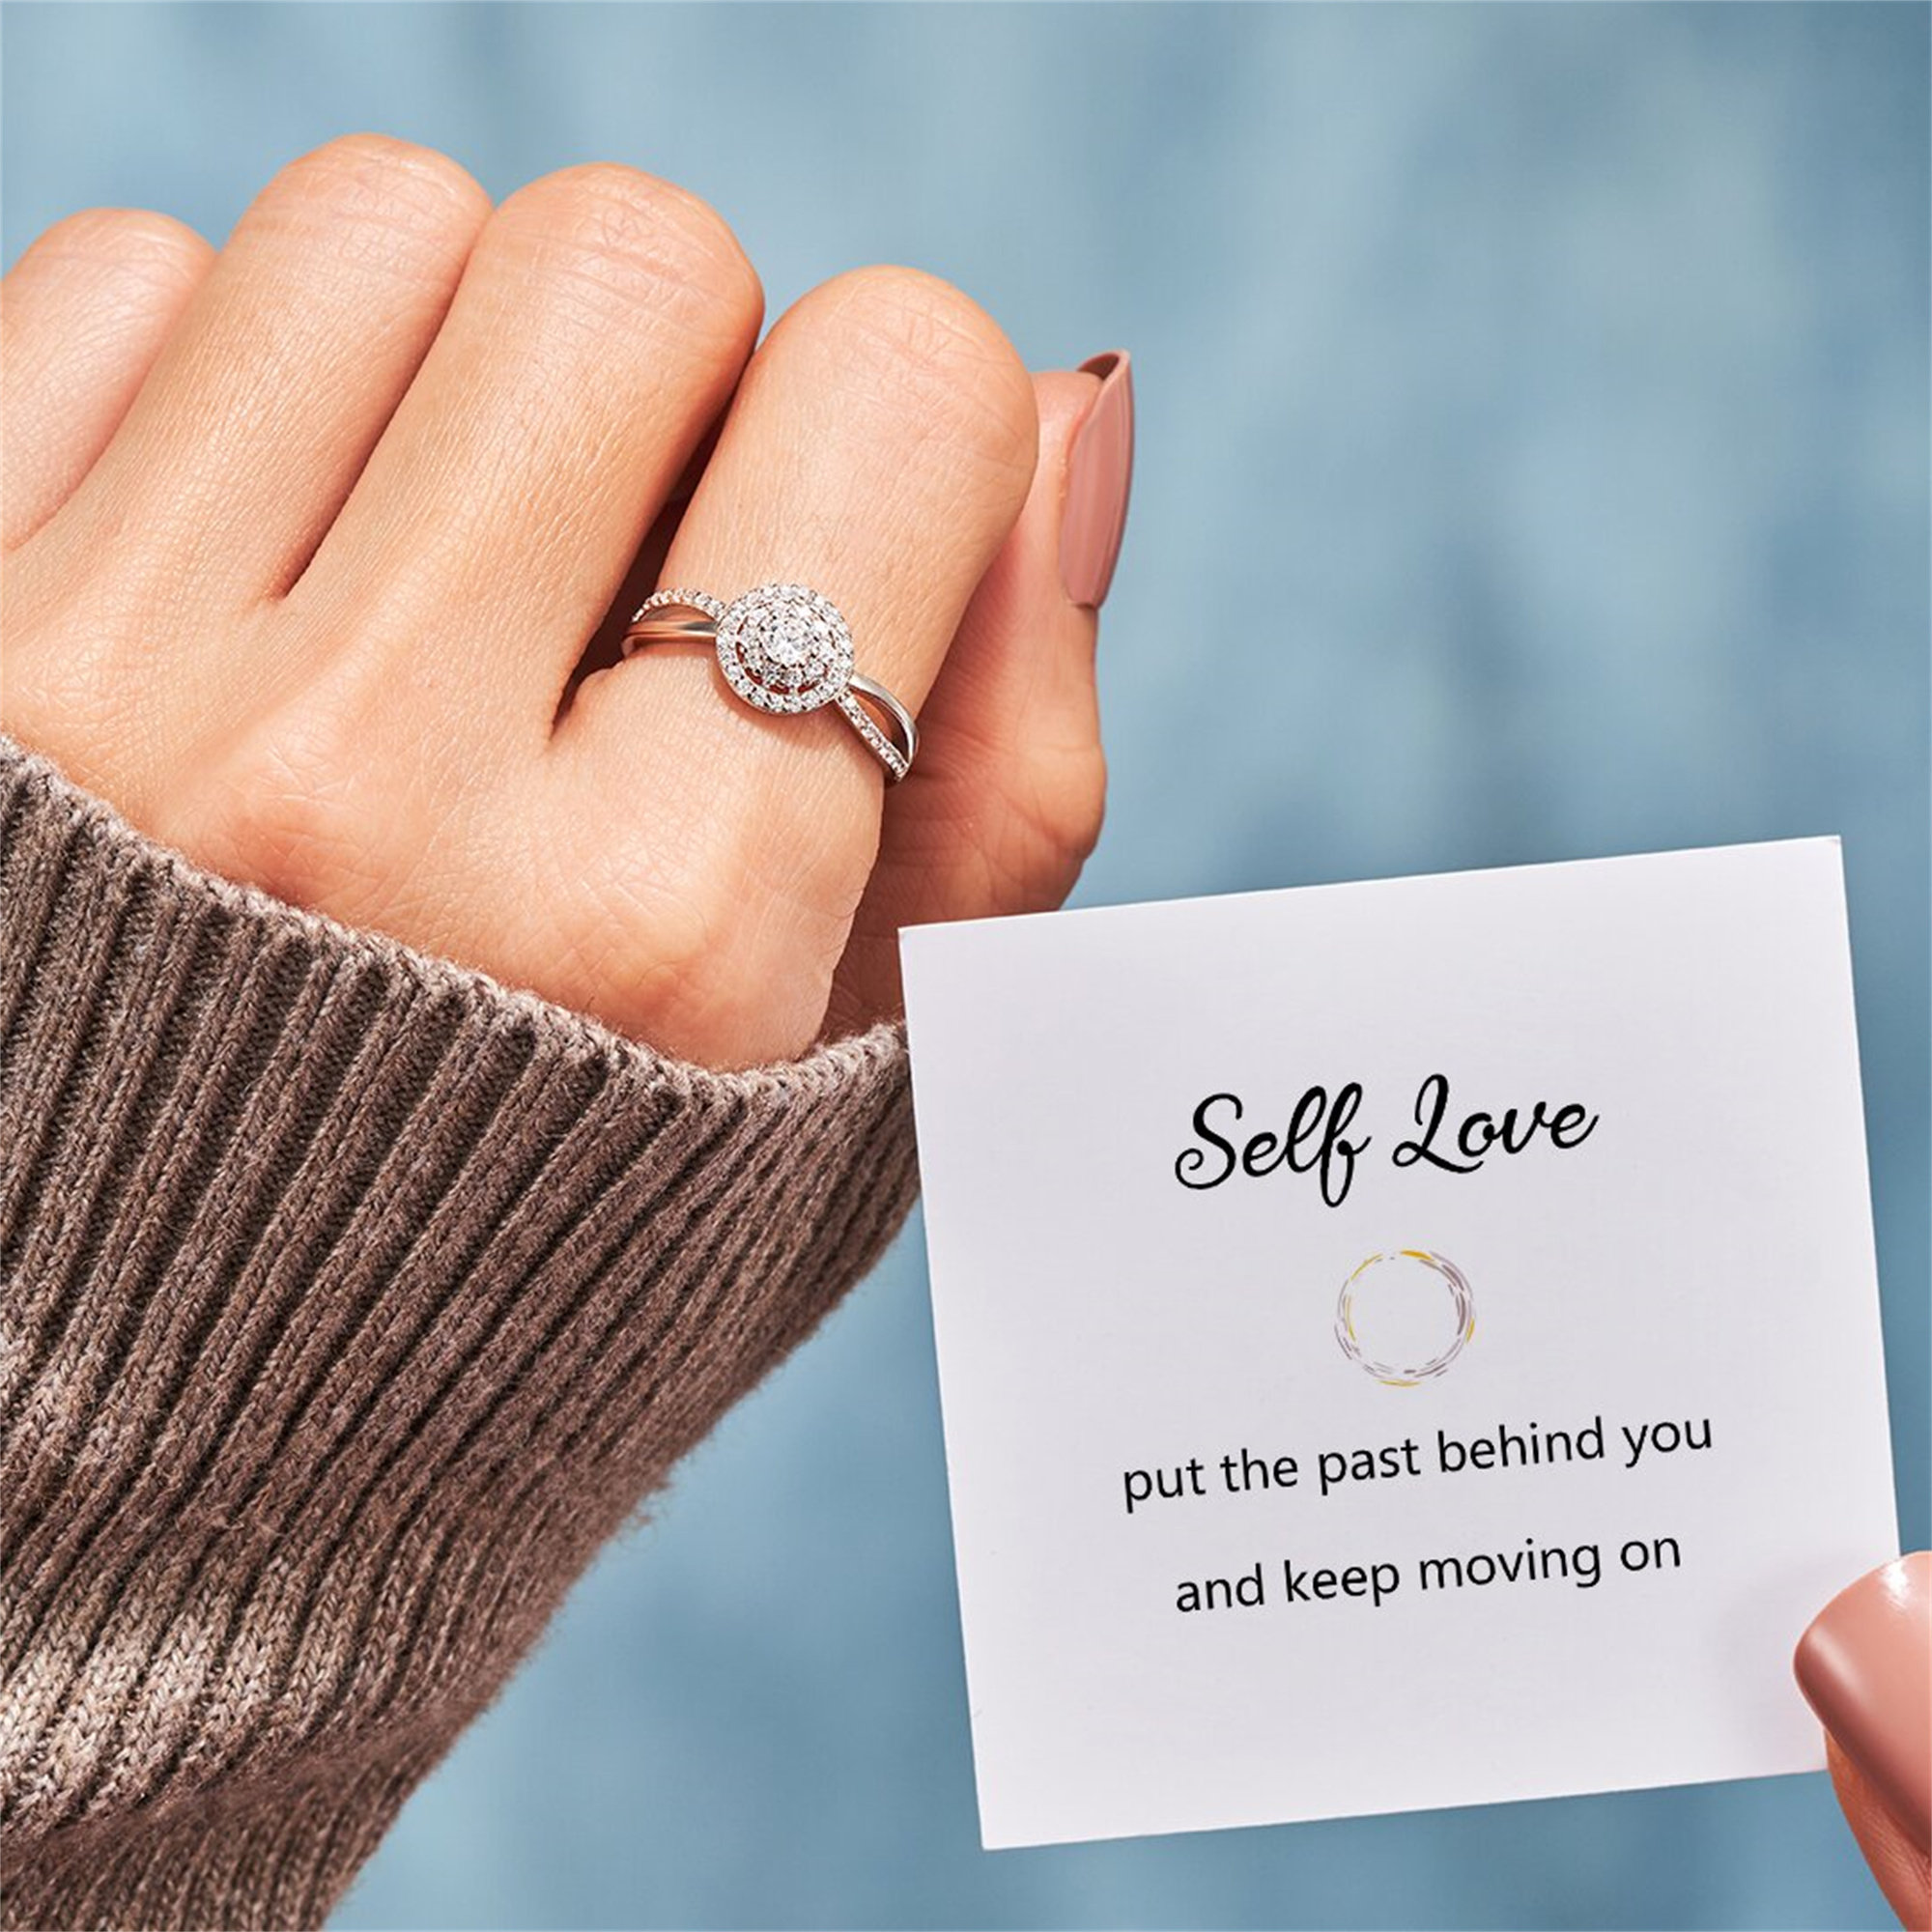 ❤️Self Love Ring-"Put the past behind you and keep moving on"🏃‍♀️